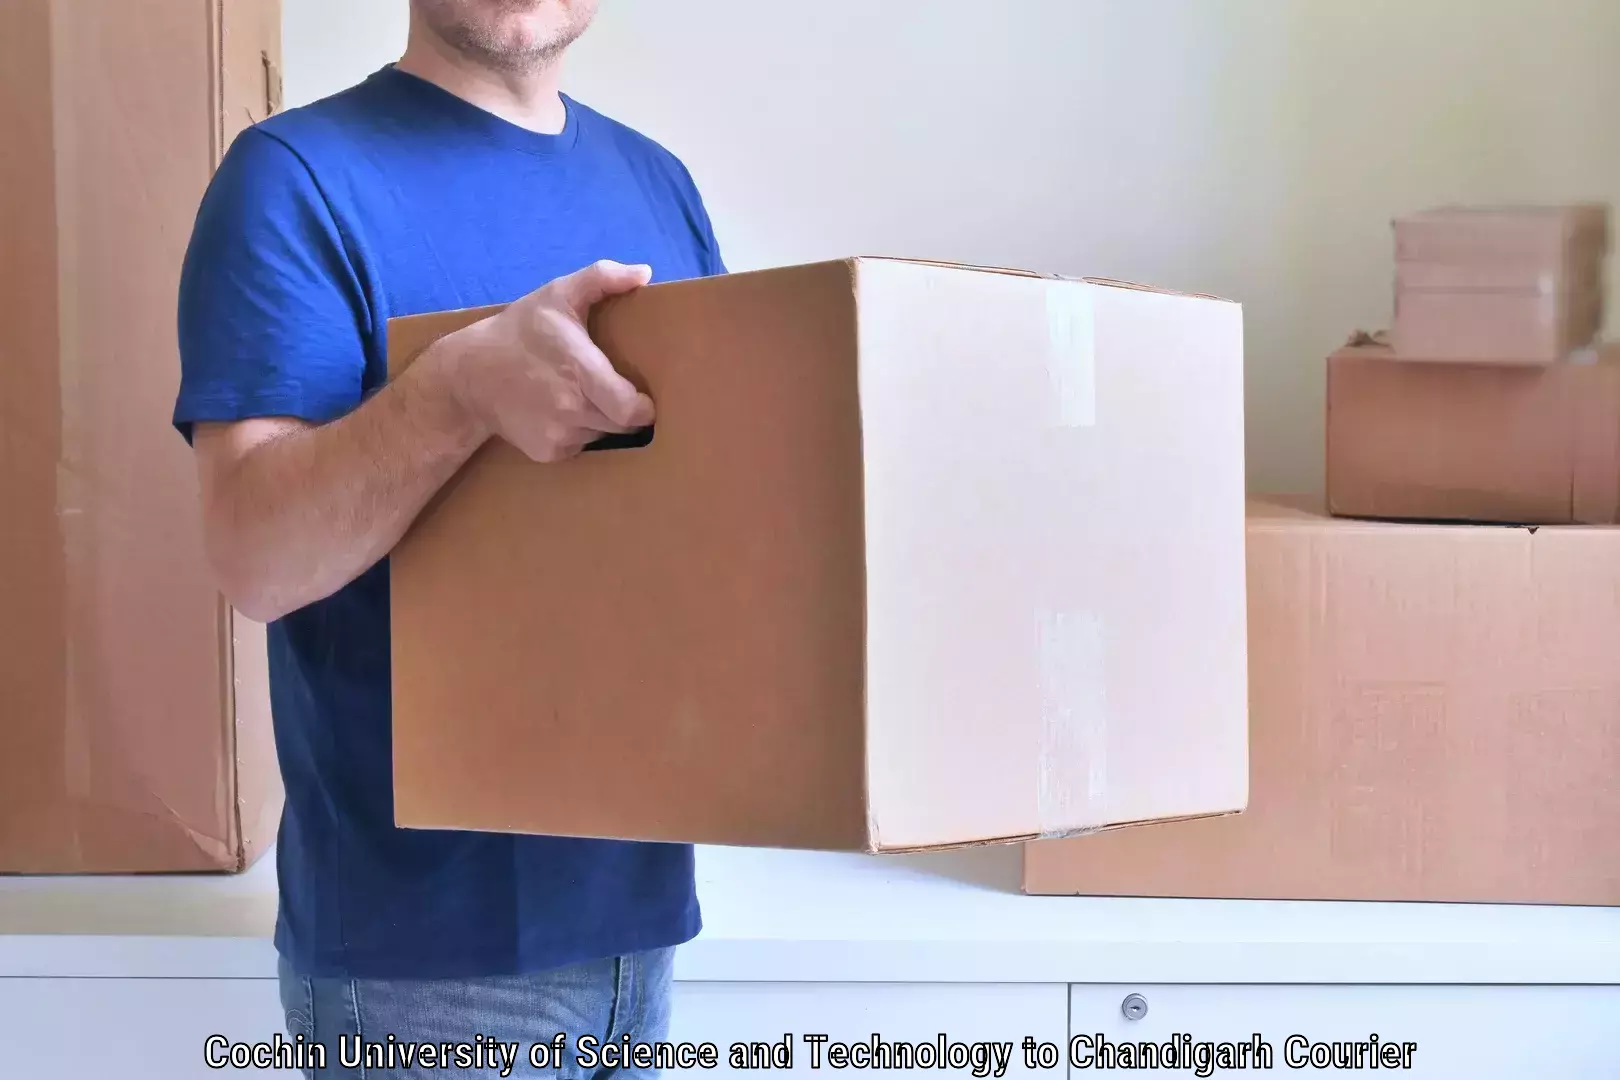 Home goods moving company Cochin University of Science and Technology to Chandigarh